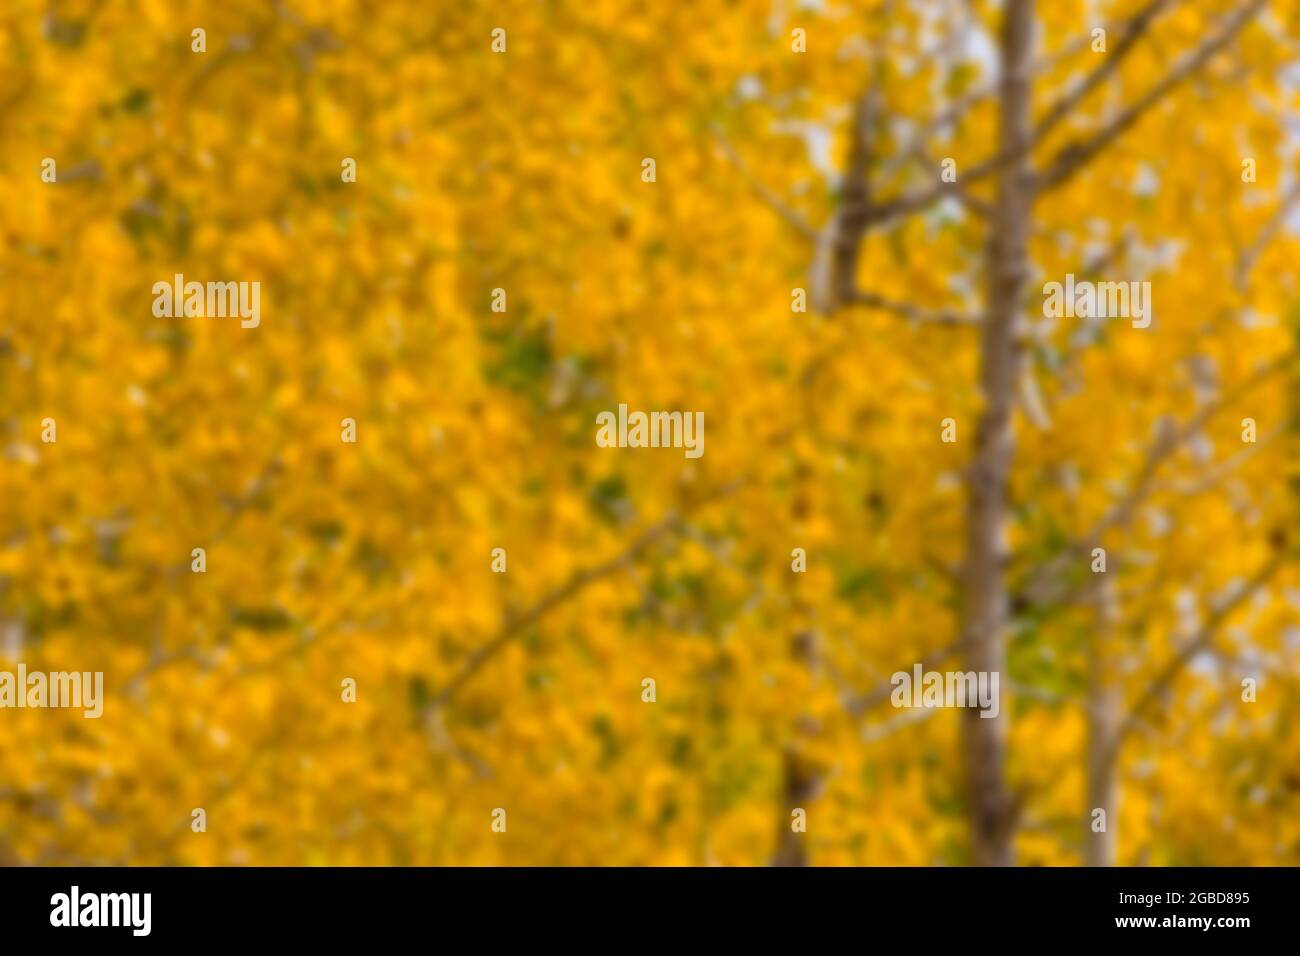 Blurred Aspen trees in Colorado for background use Stock Photo